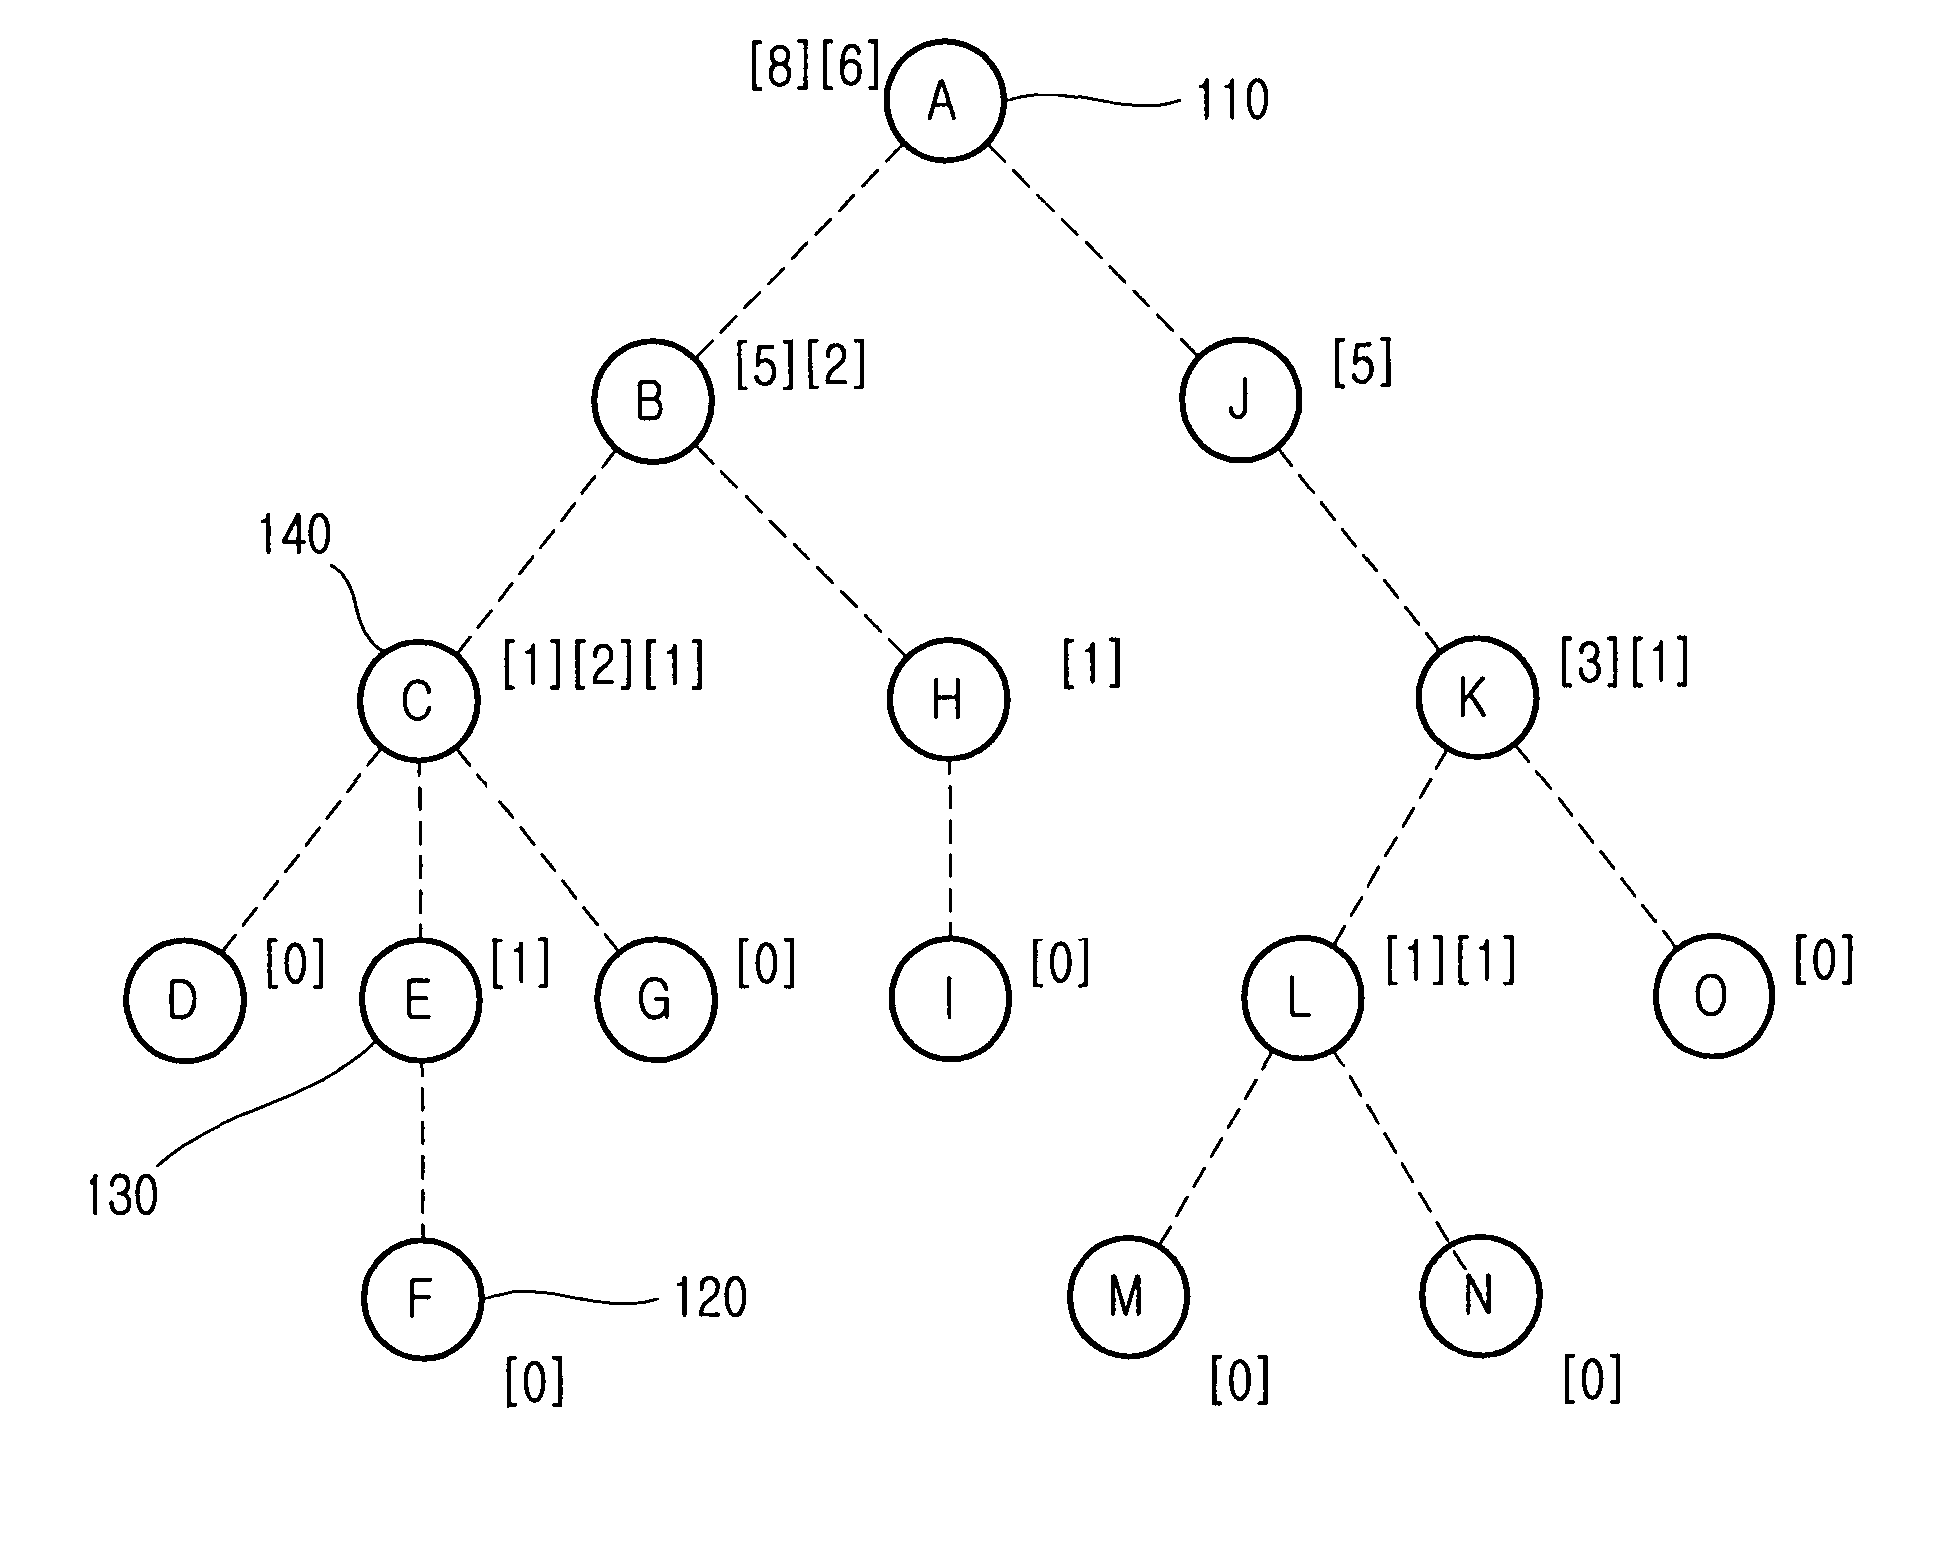 Tree-guided distributed link state routing method